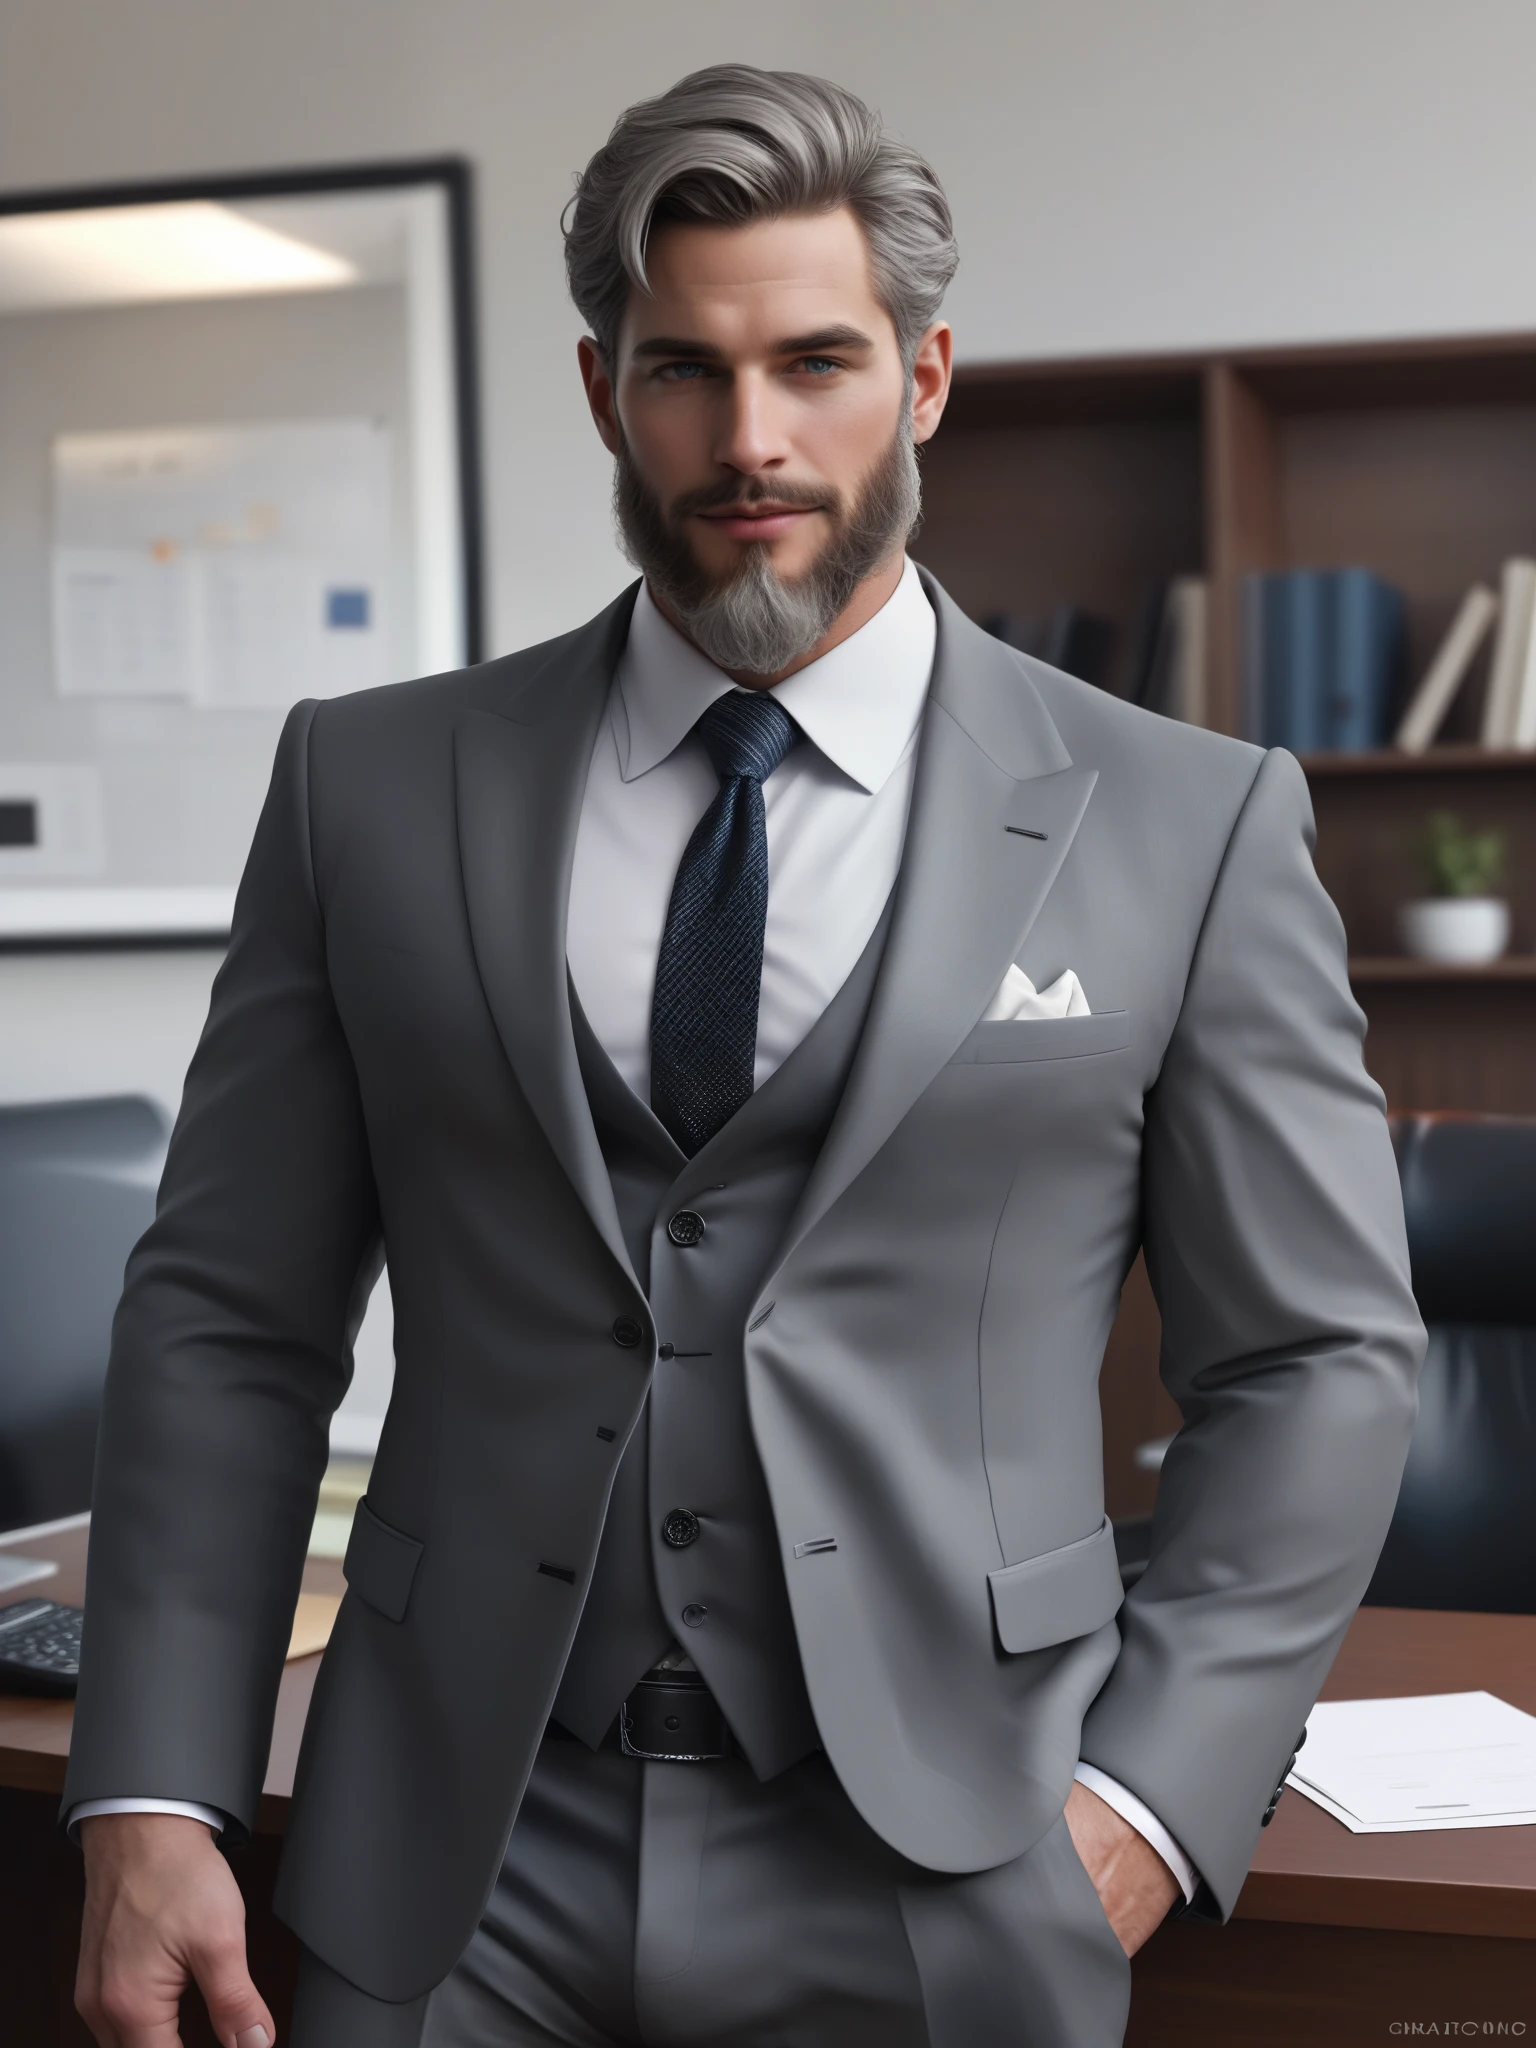 score_9, score_8_up, realistic, a handsome mature man, 45 years old, beard, gray hair, wearing a suit, in the background a luxurious office
